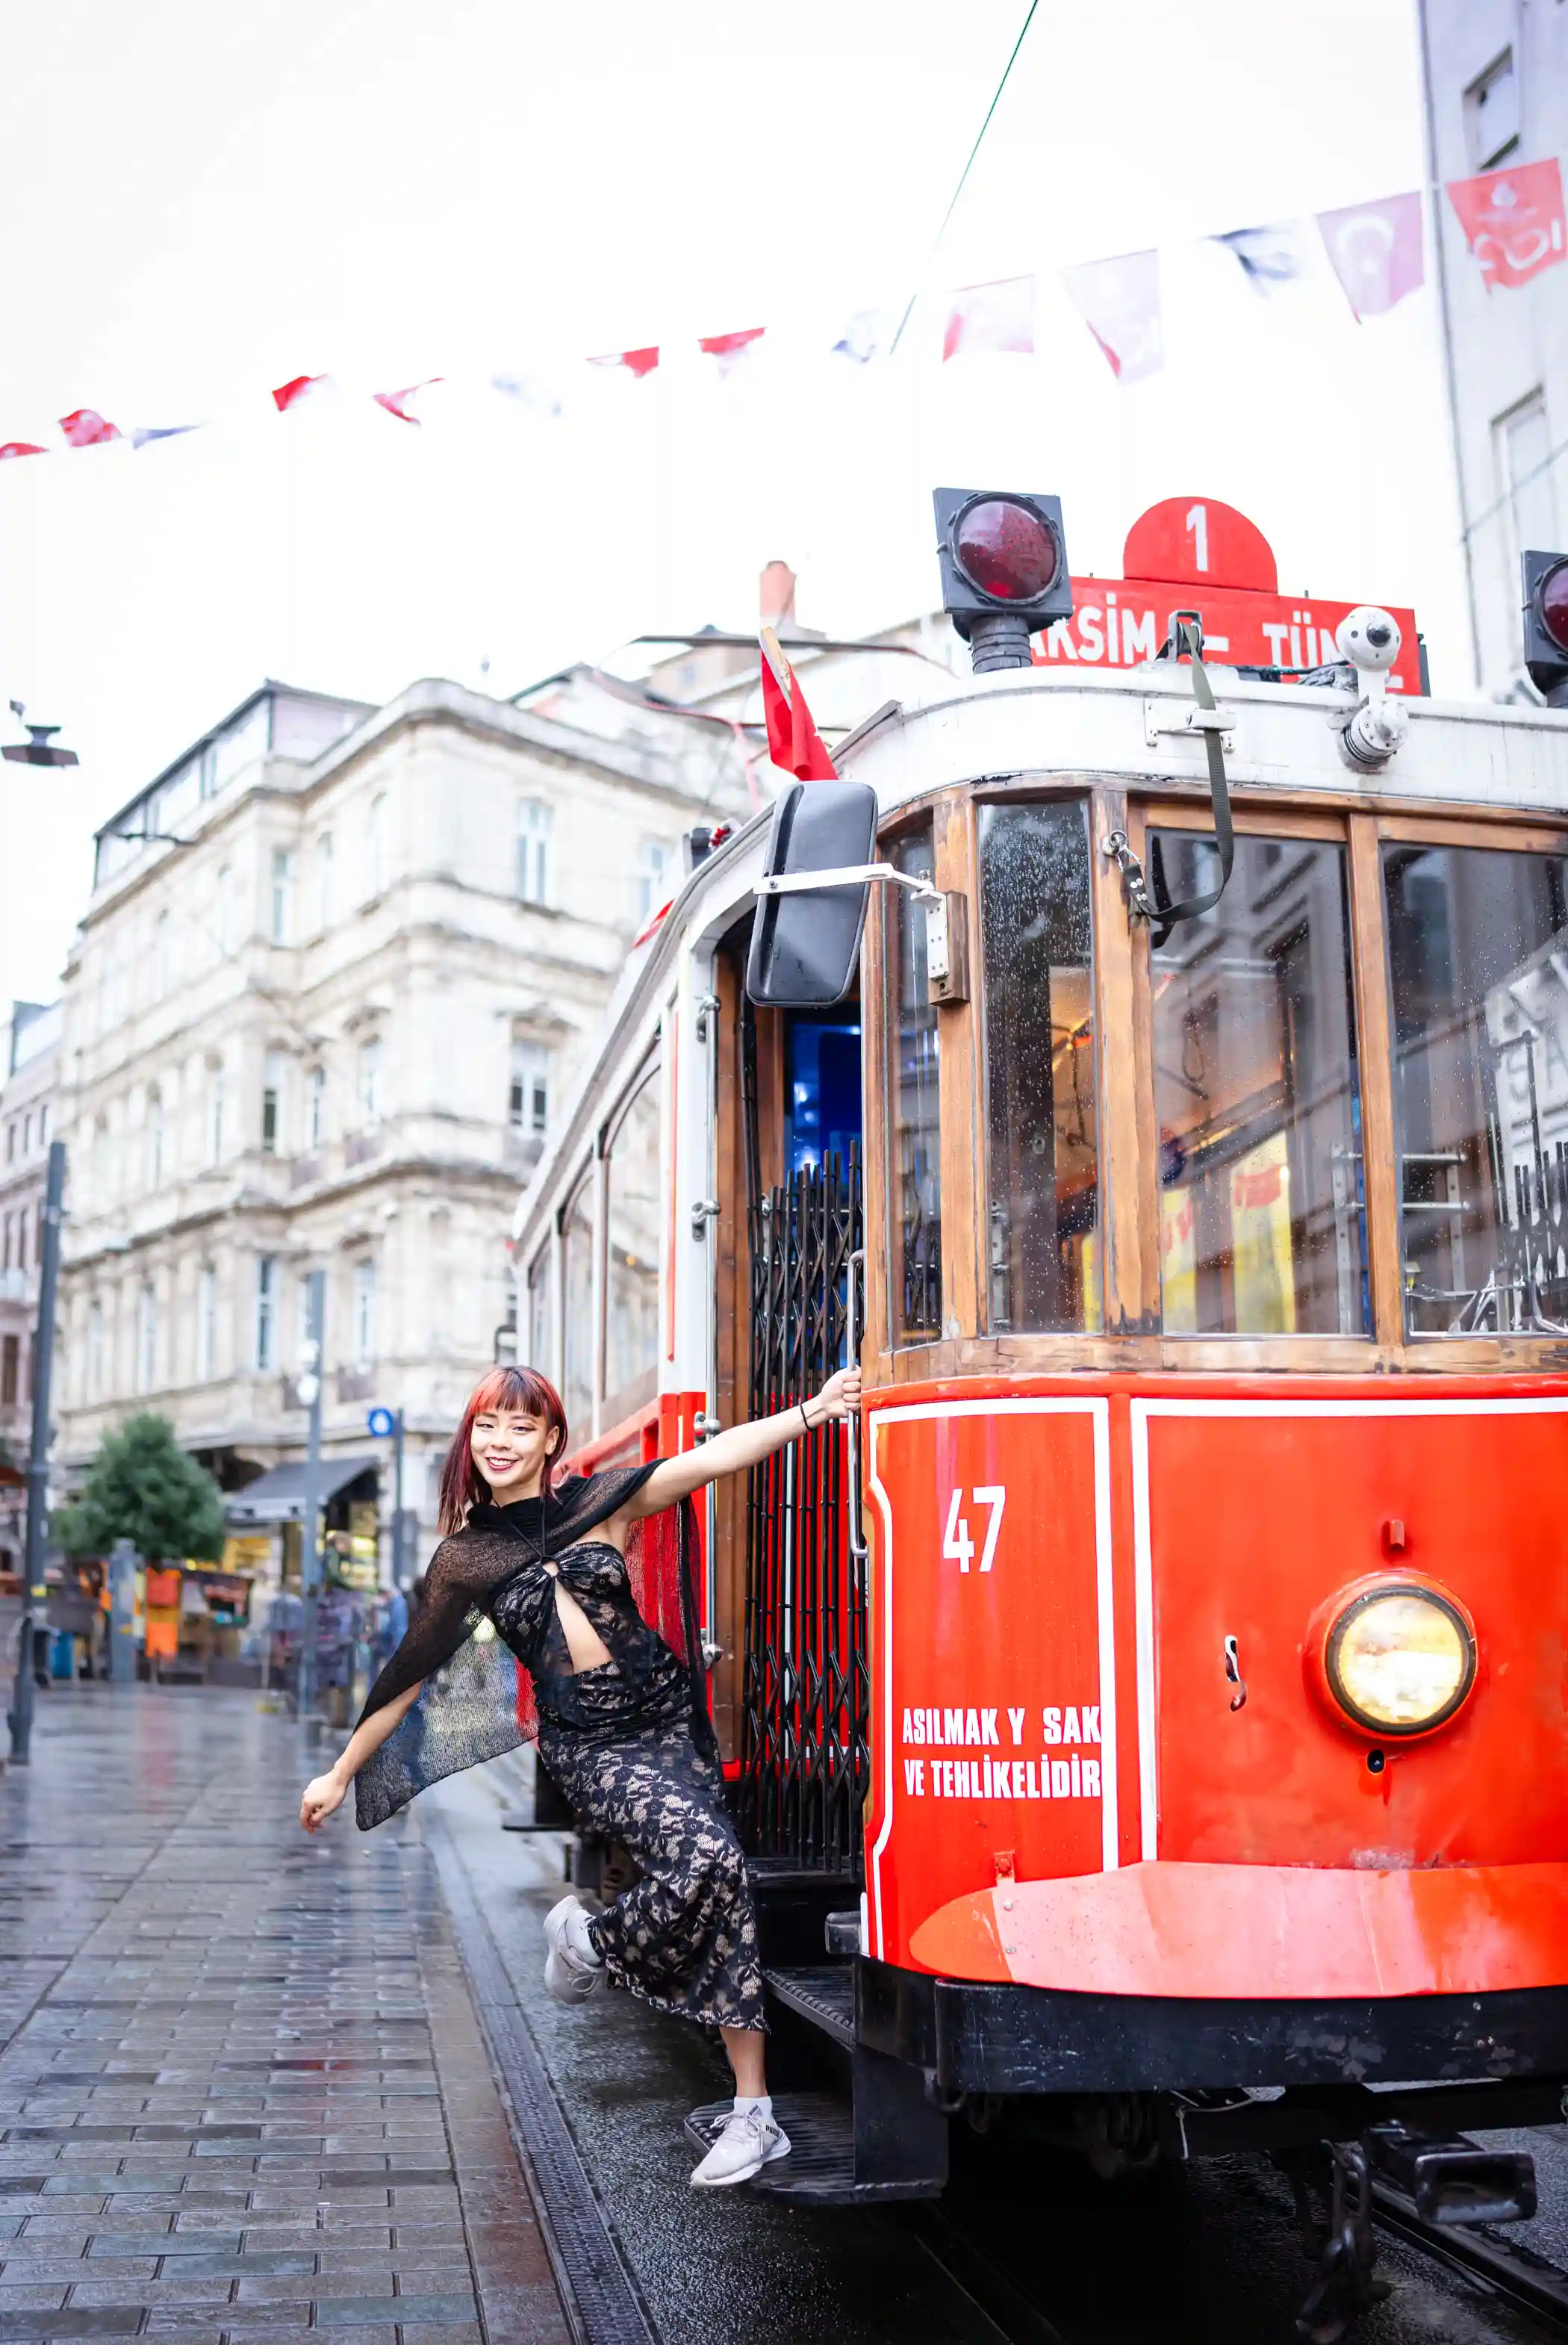 Against the lively backdrop of Istiklal Street, the Singaporean girl becomes a beacon of grace and beauty. Each photograph captures her essence, as she exudes confidence and poise amidst the vibrant energy of the bustling street. The colorful facades of the surrounding buildings provide a stunning backdrop for showcasing her allure, while the passing Red Tram adds a sense of movement and whimsy to the scene.